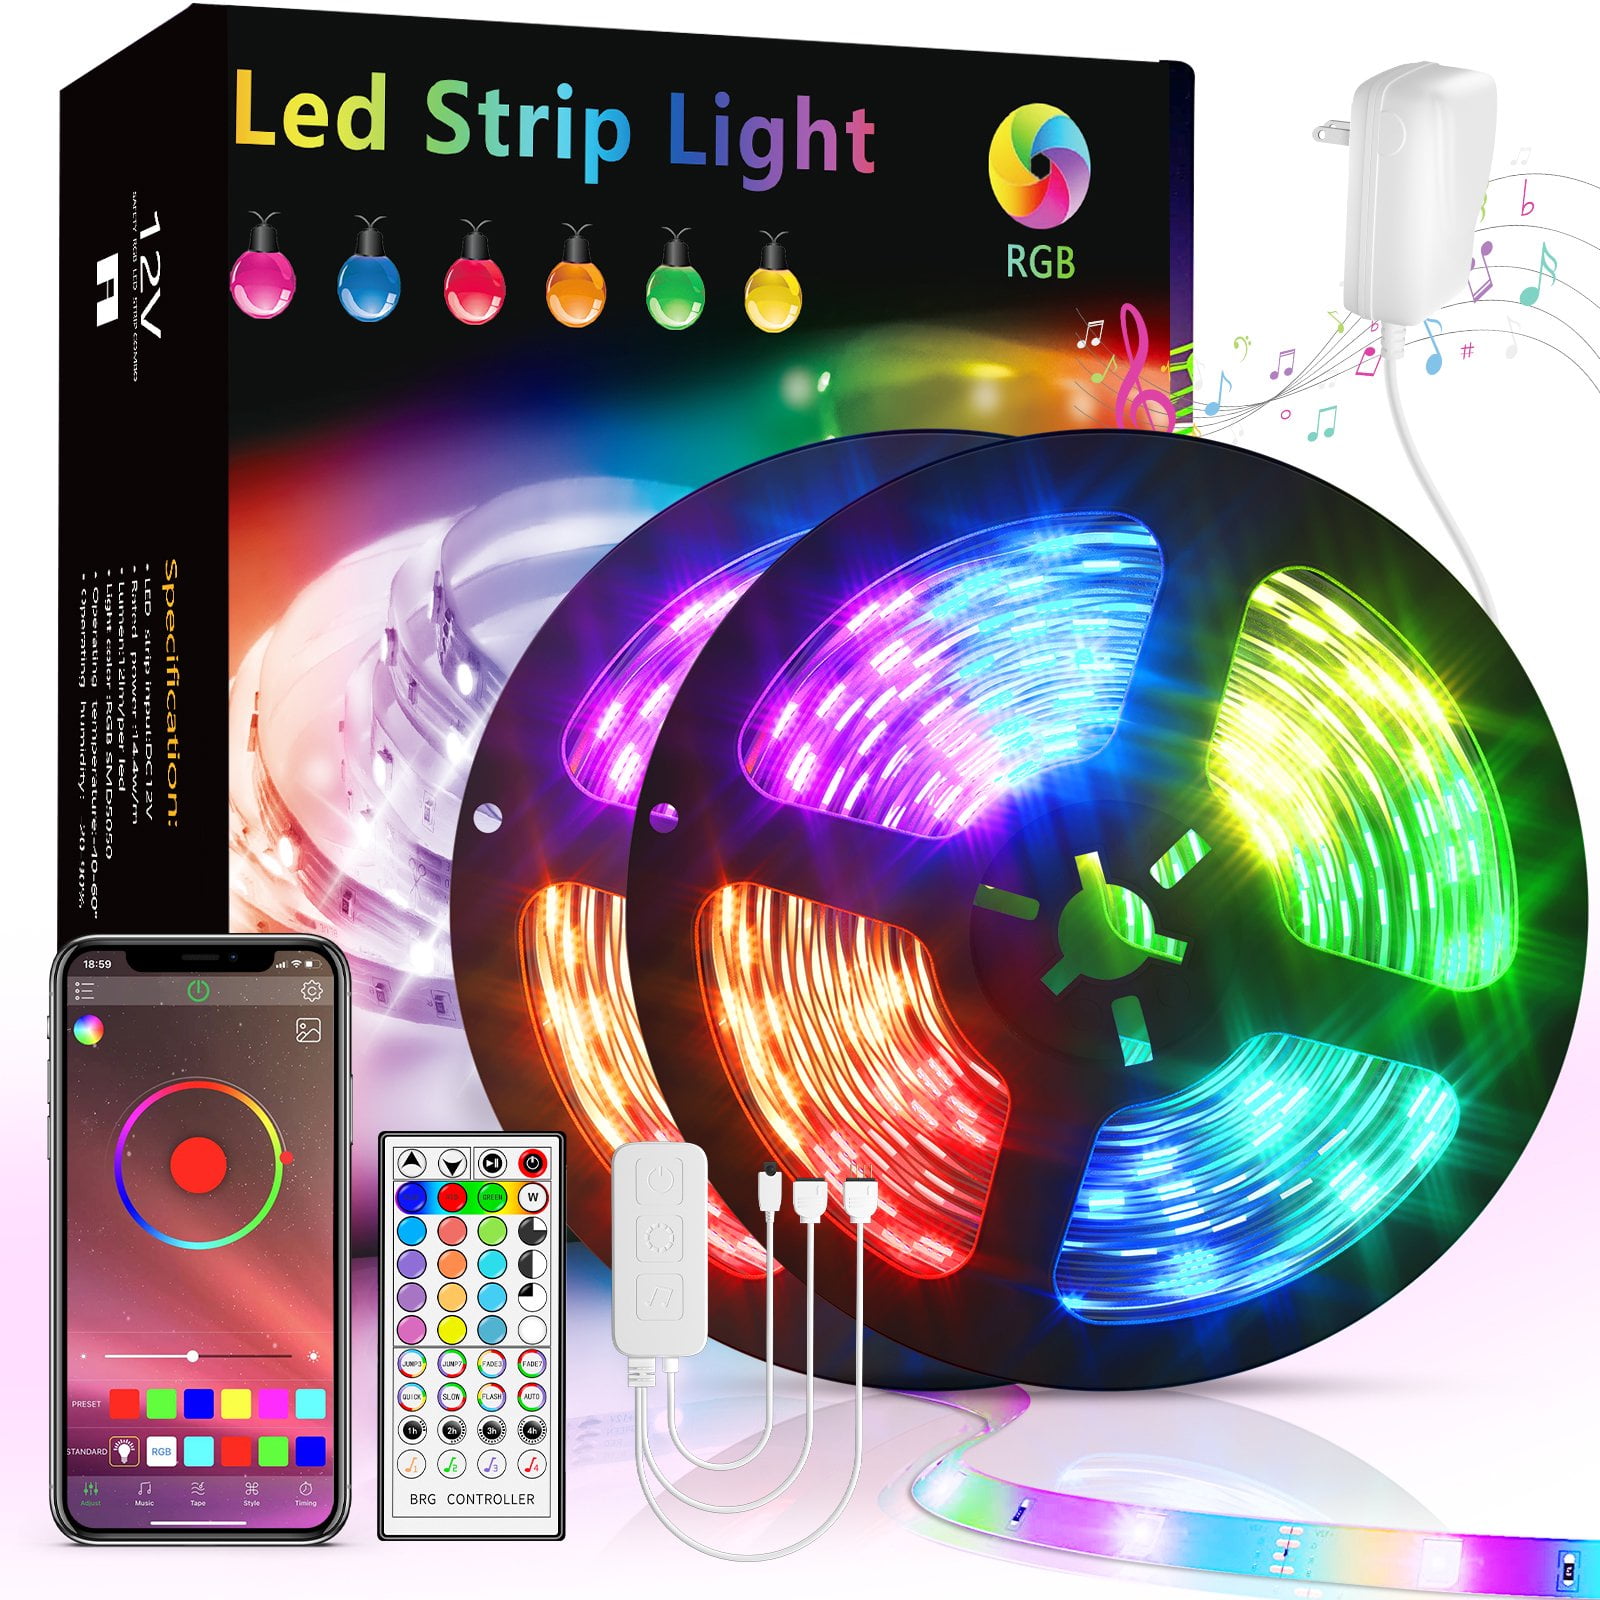 Details about   20M 66FT Flexible Strip Light 3528 RGB LED SMD Remote Fairy Lights Room TV Party 